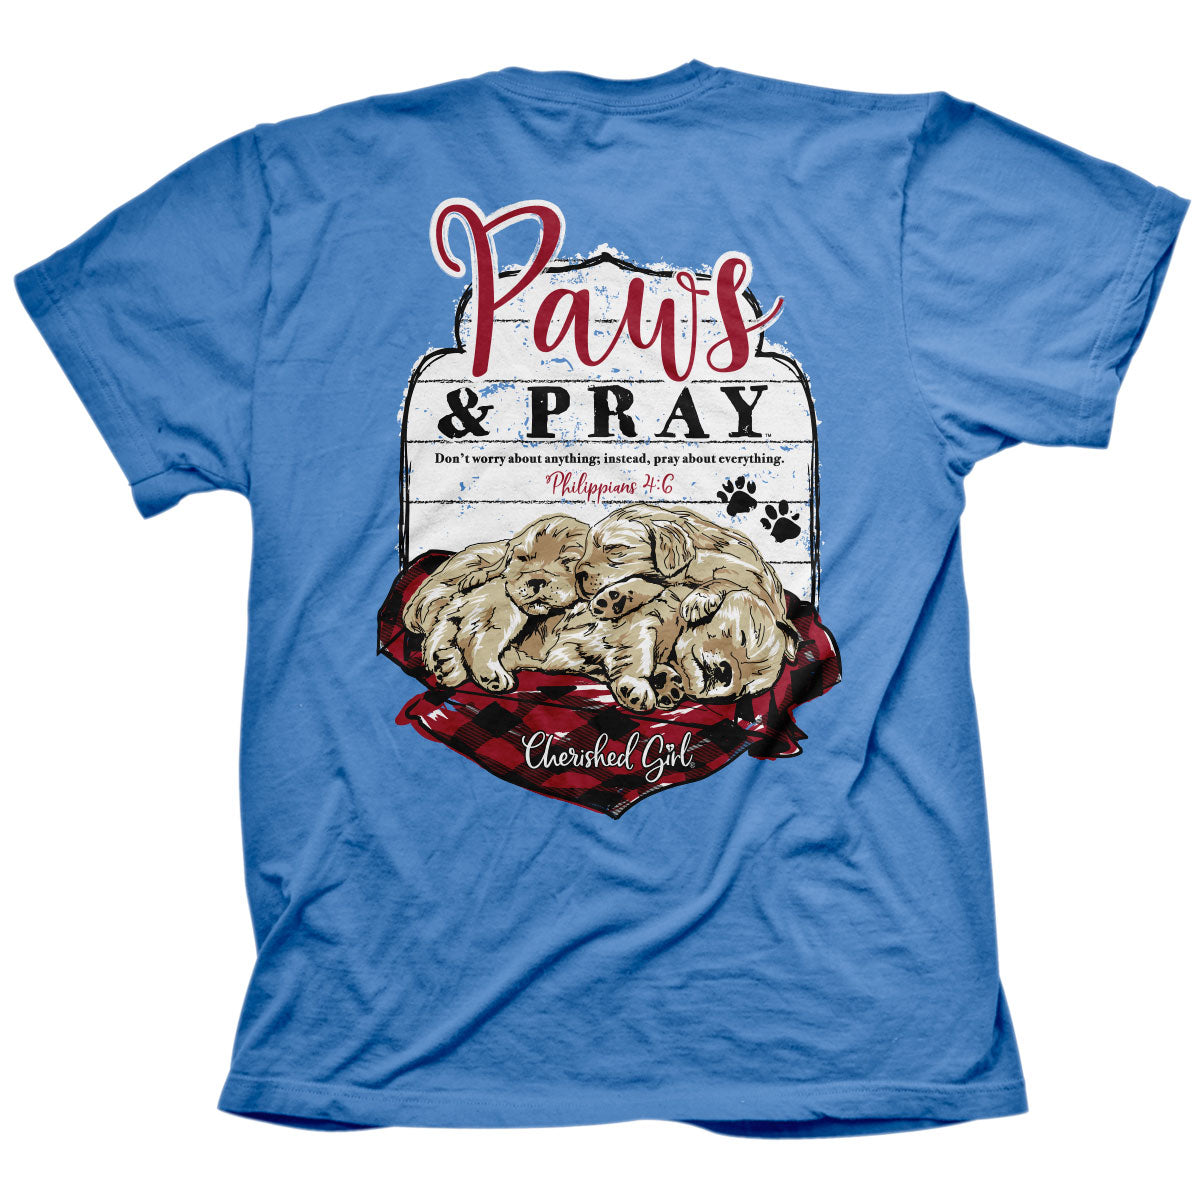 Cherished Girl Womens T-Shirt Paws And Pray